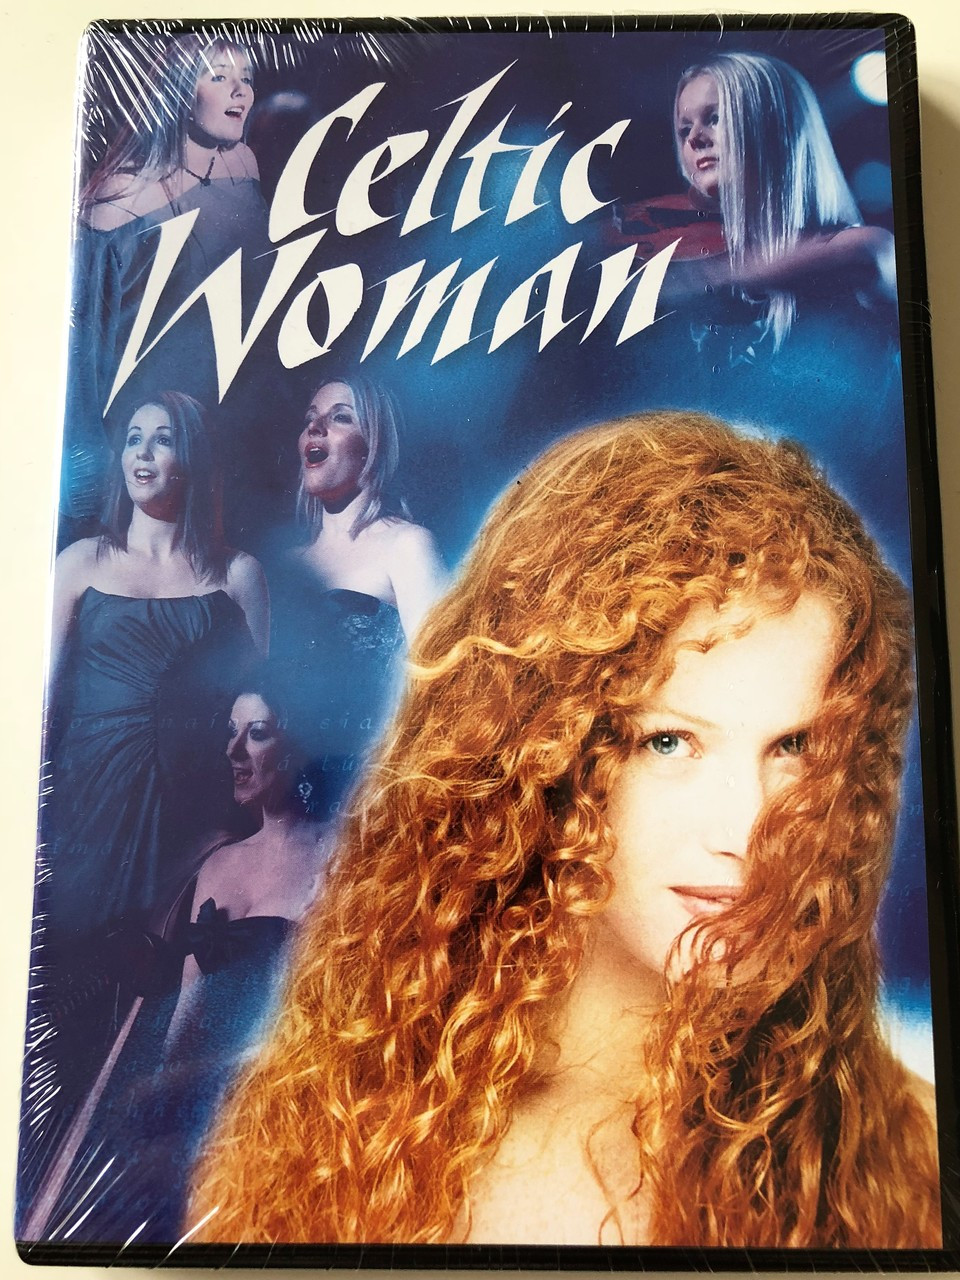 Celtic Woman DVD Filmed Live, Concert at the Helix Center in Dublin,  Ireland / Irish musical ensemble conceived and created by David Kavanagh /  REGION 2 PAL from Europe - bibleinmylanguage